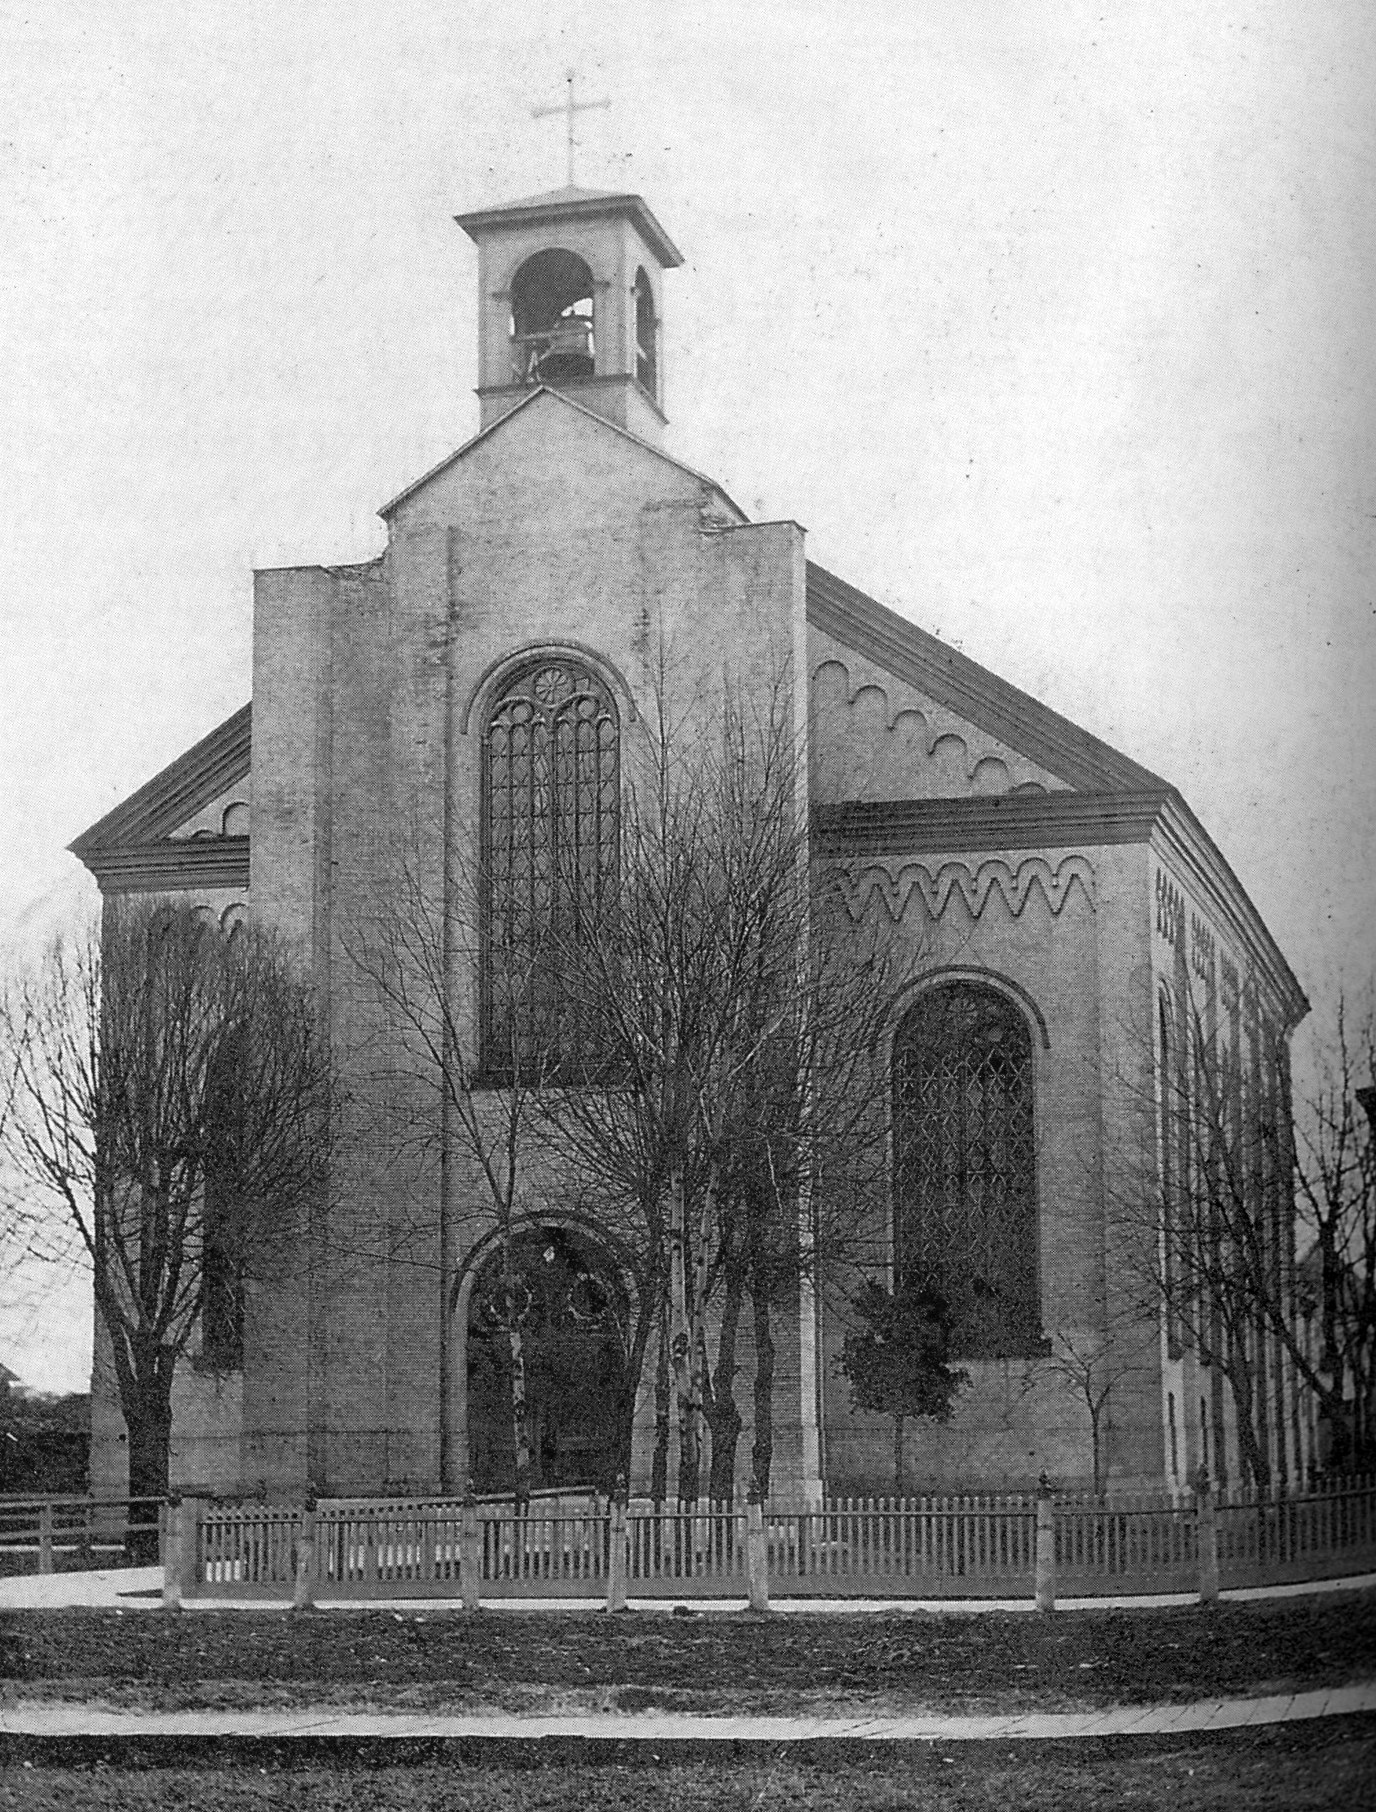 St. Patrick's Church completed in 1867.